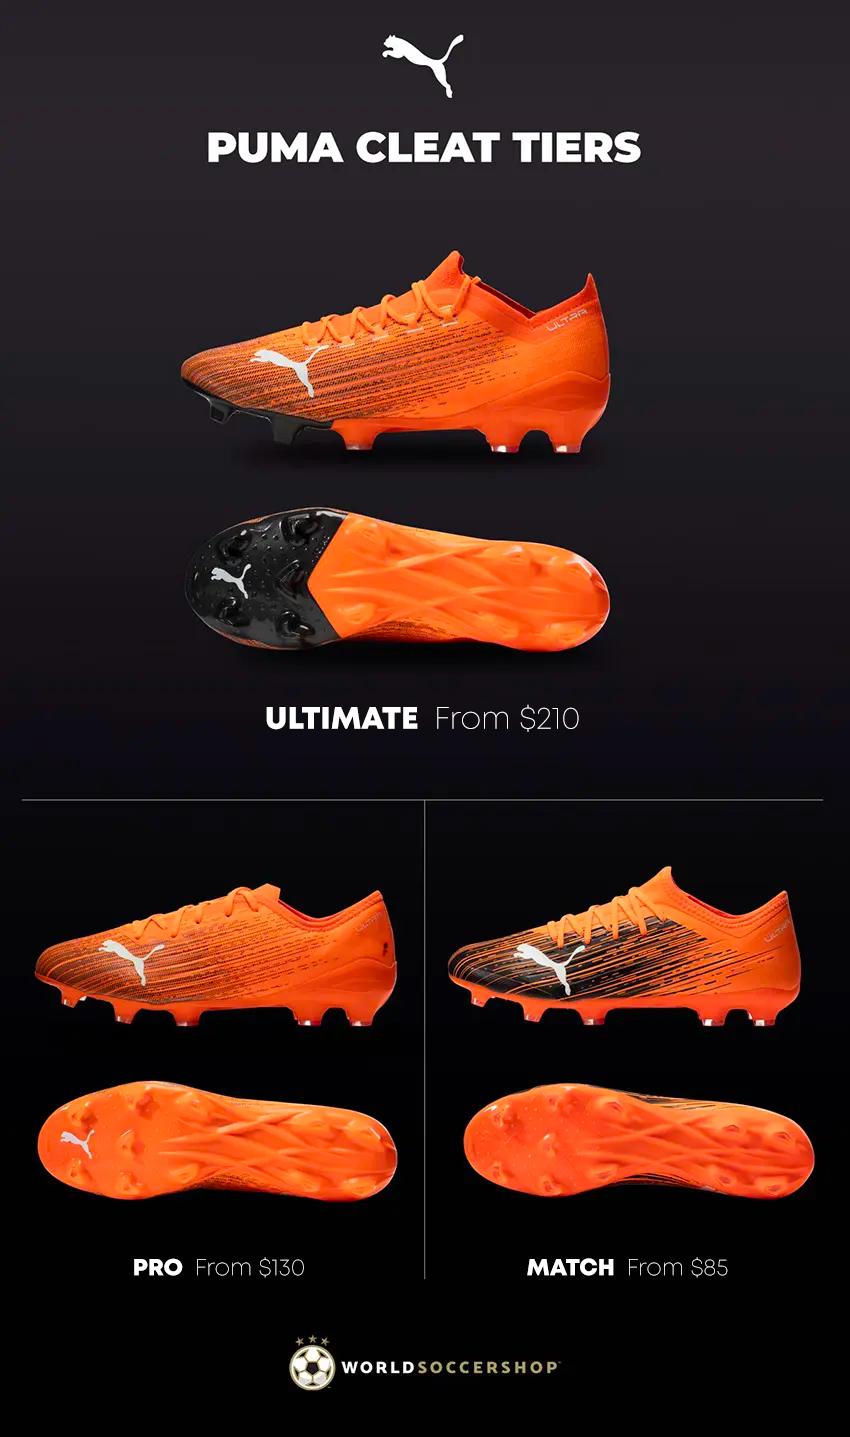 A Look at PUMA Cleat Price Tiers